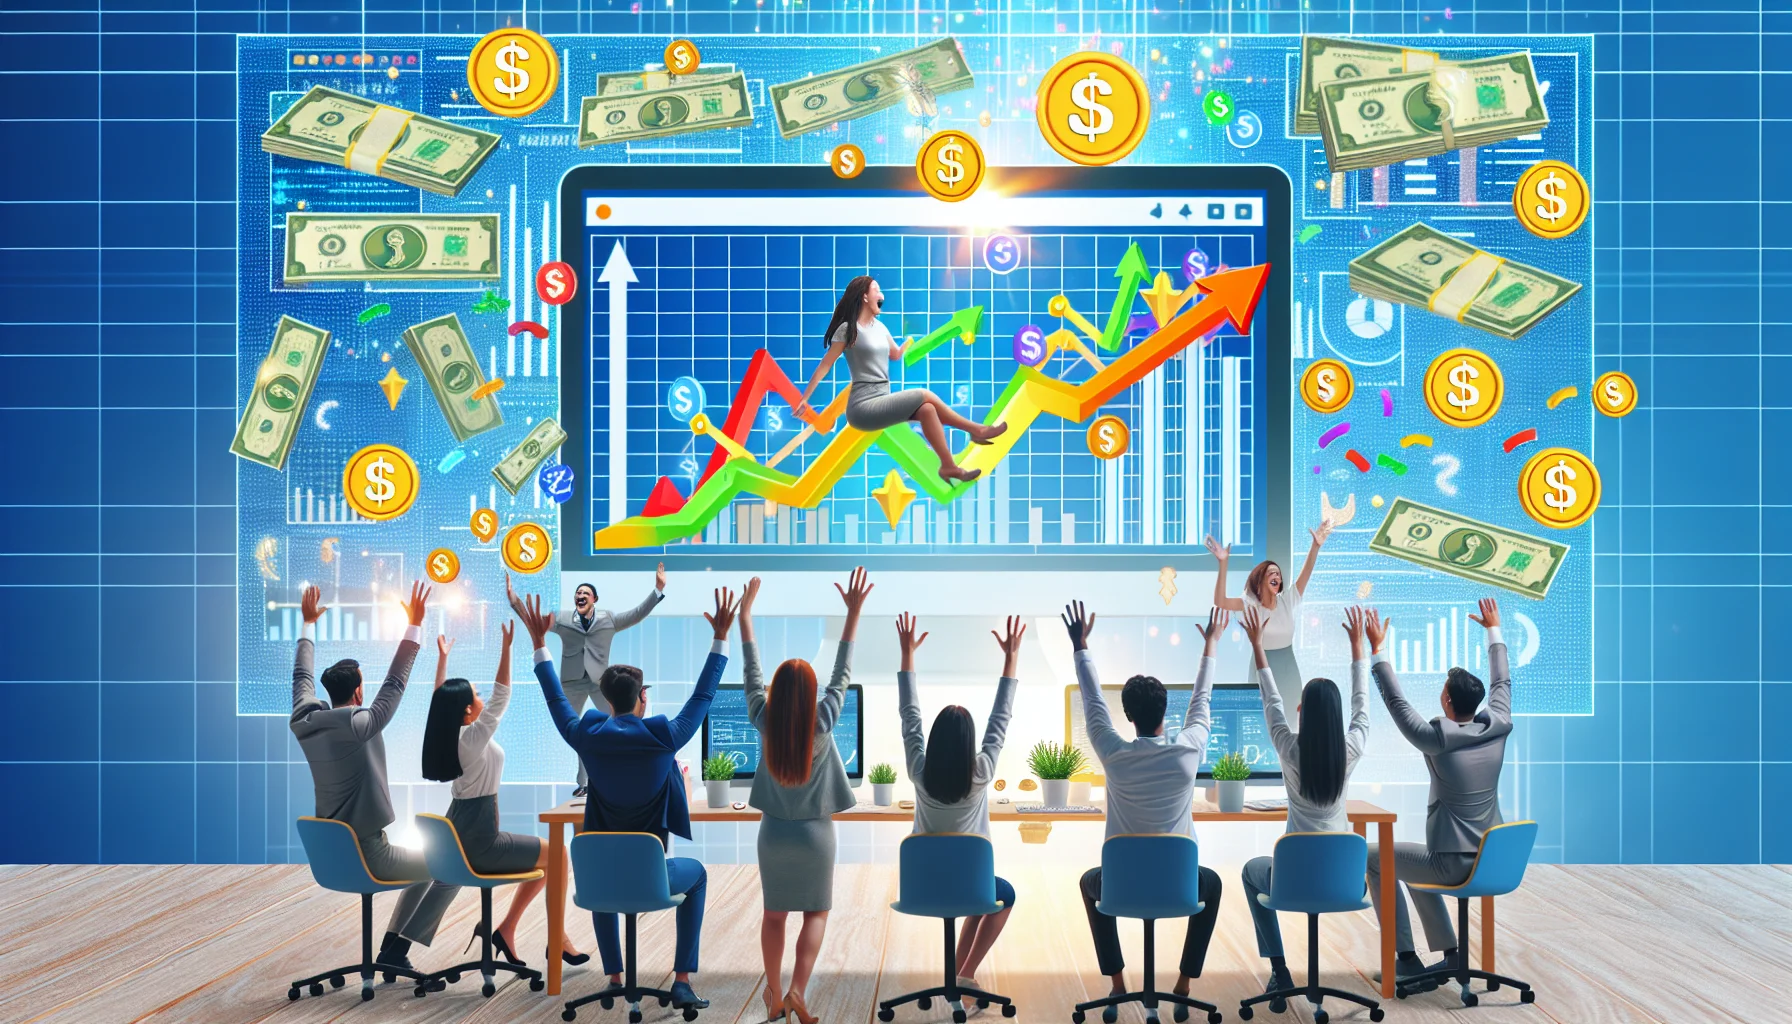 Create an amusing conceptual image that portrays the journey of becoming an affiliate of a large multi-national retail corporation, similar to Walmart. The setting is an online environment. It's a bright workstation with several visual indicators pointing towards making money online. There are charts and graphs on a computer screen, showing upward growth trends. Multiple currency symbols hover around the screen, indicating the potential earnings. A cheerful and unequivocally enthusiastic diverse group of men and women are present in the scene, all showcasing their excitement by high-fiving each other or gesturing their joy. They symbolize the affiliates who have found success online.